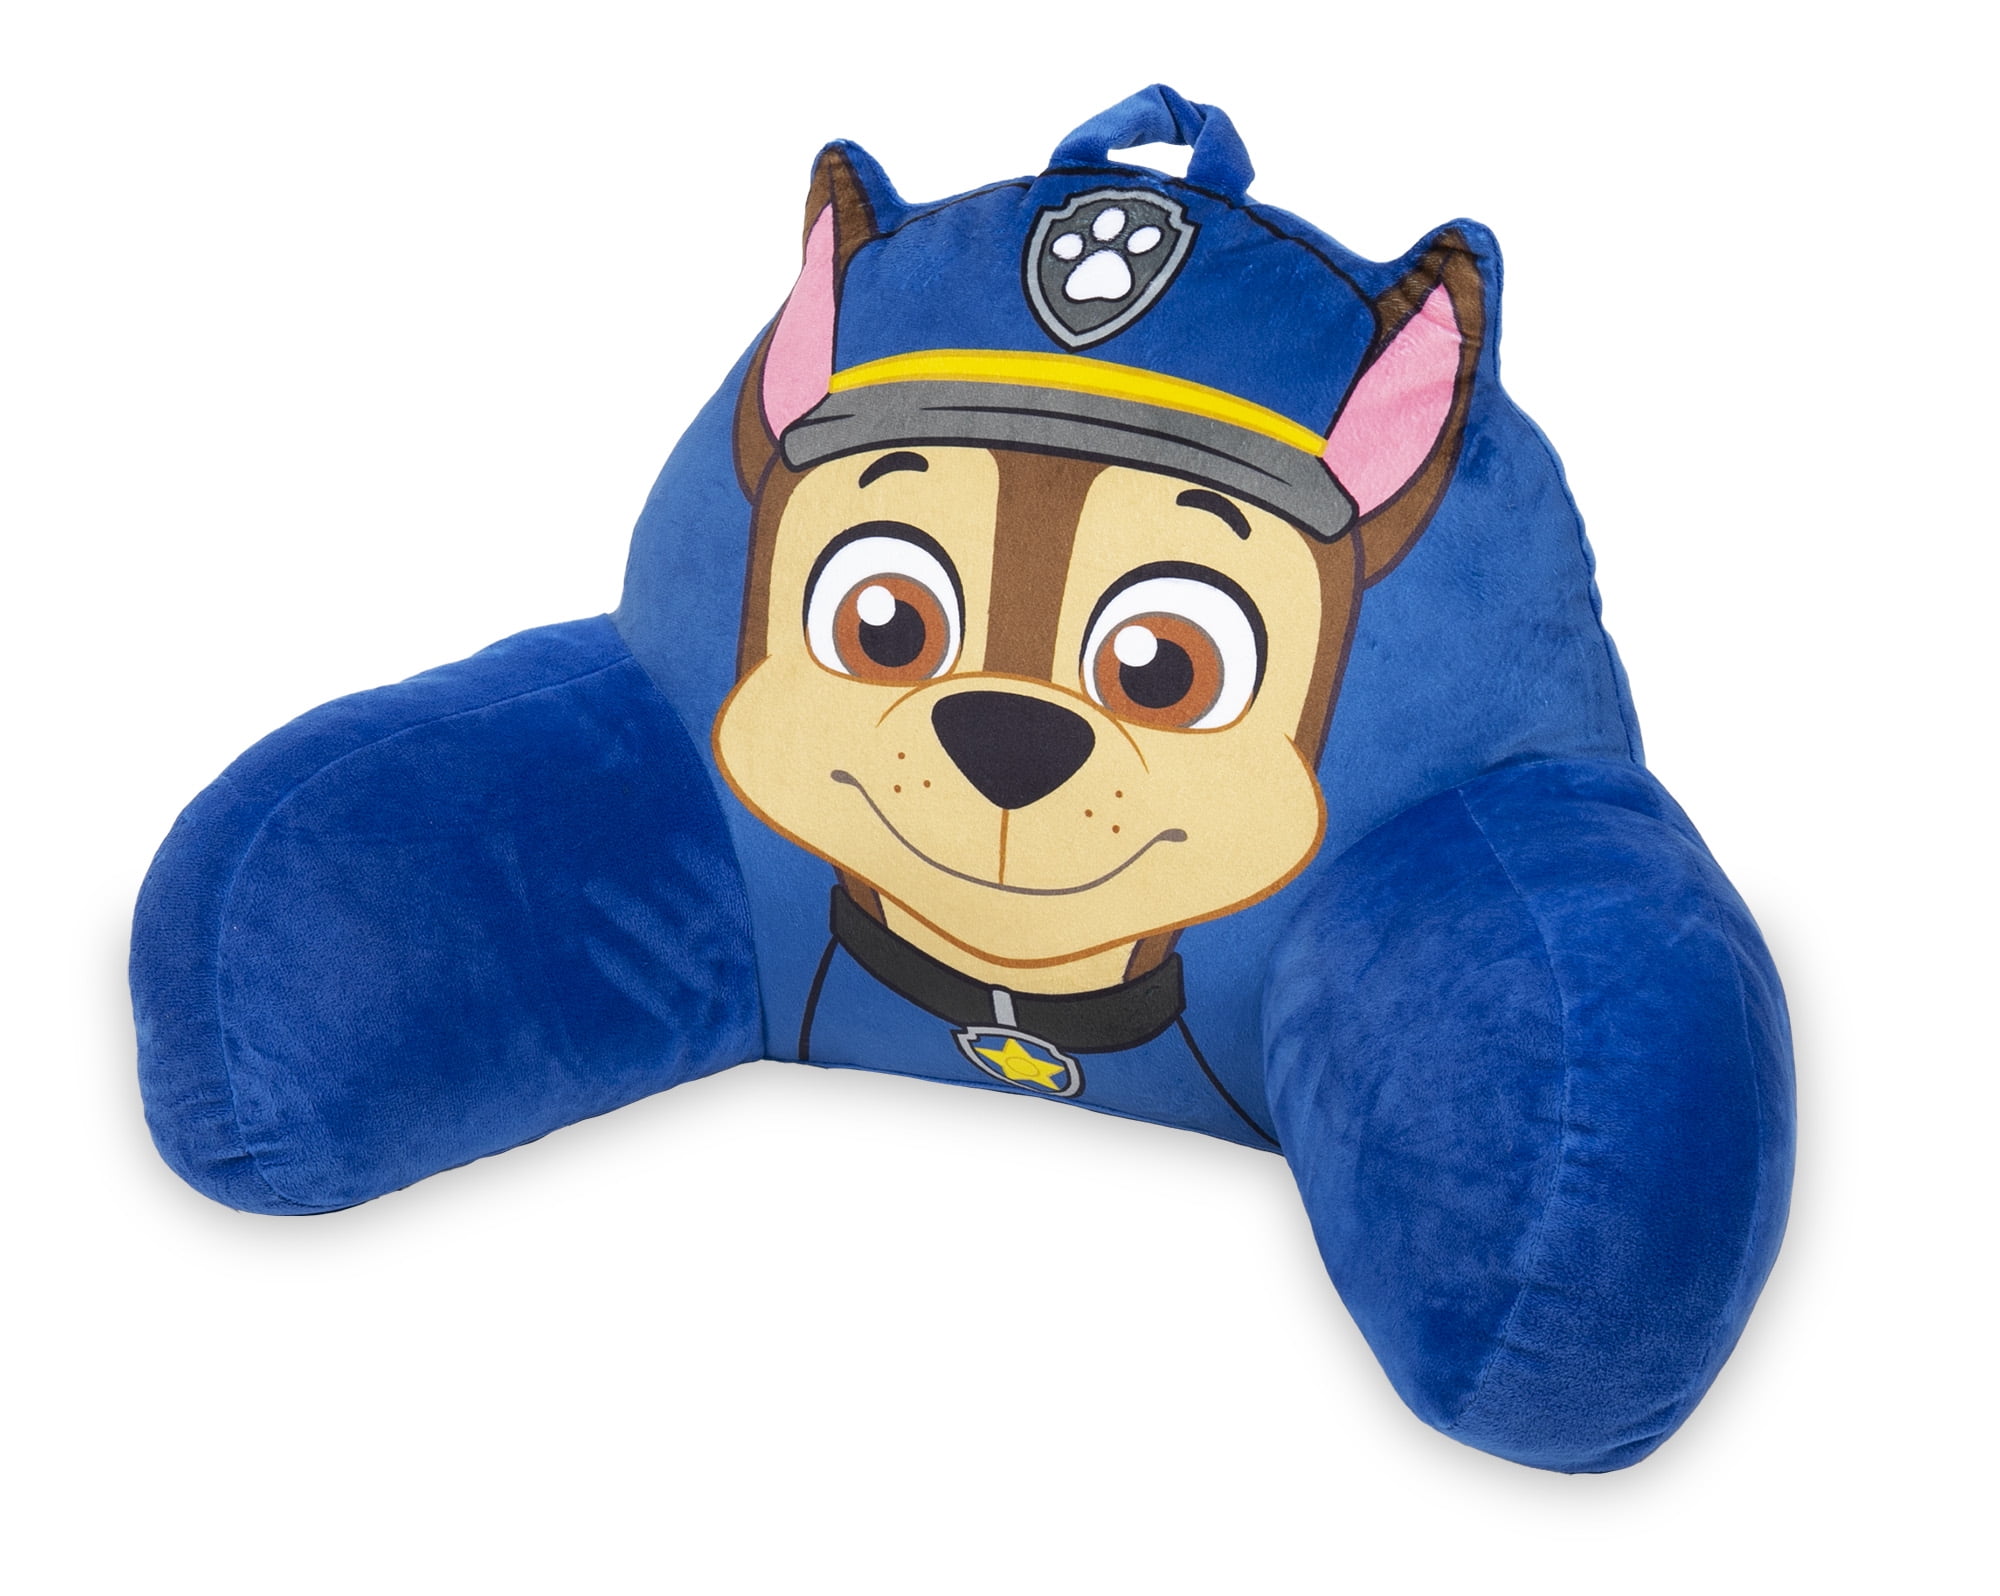 PAW Patrol 14 in x 16.75 in Blue/Brown Polyester Floor Pillow